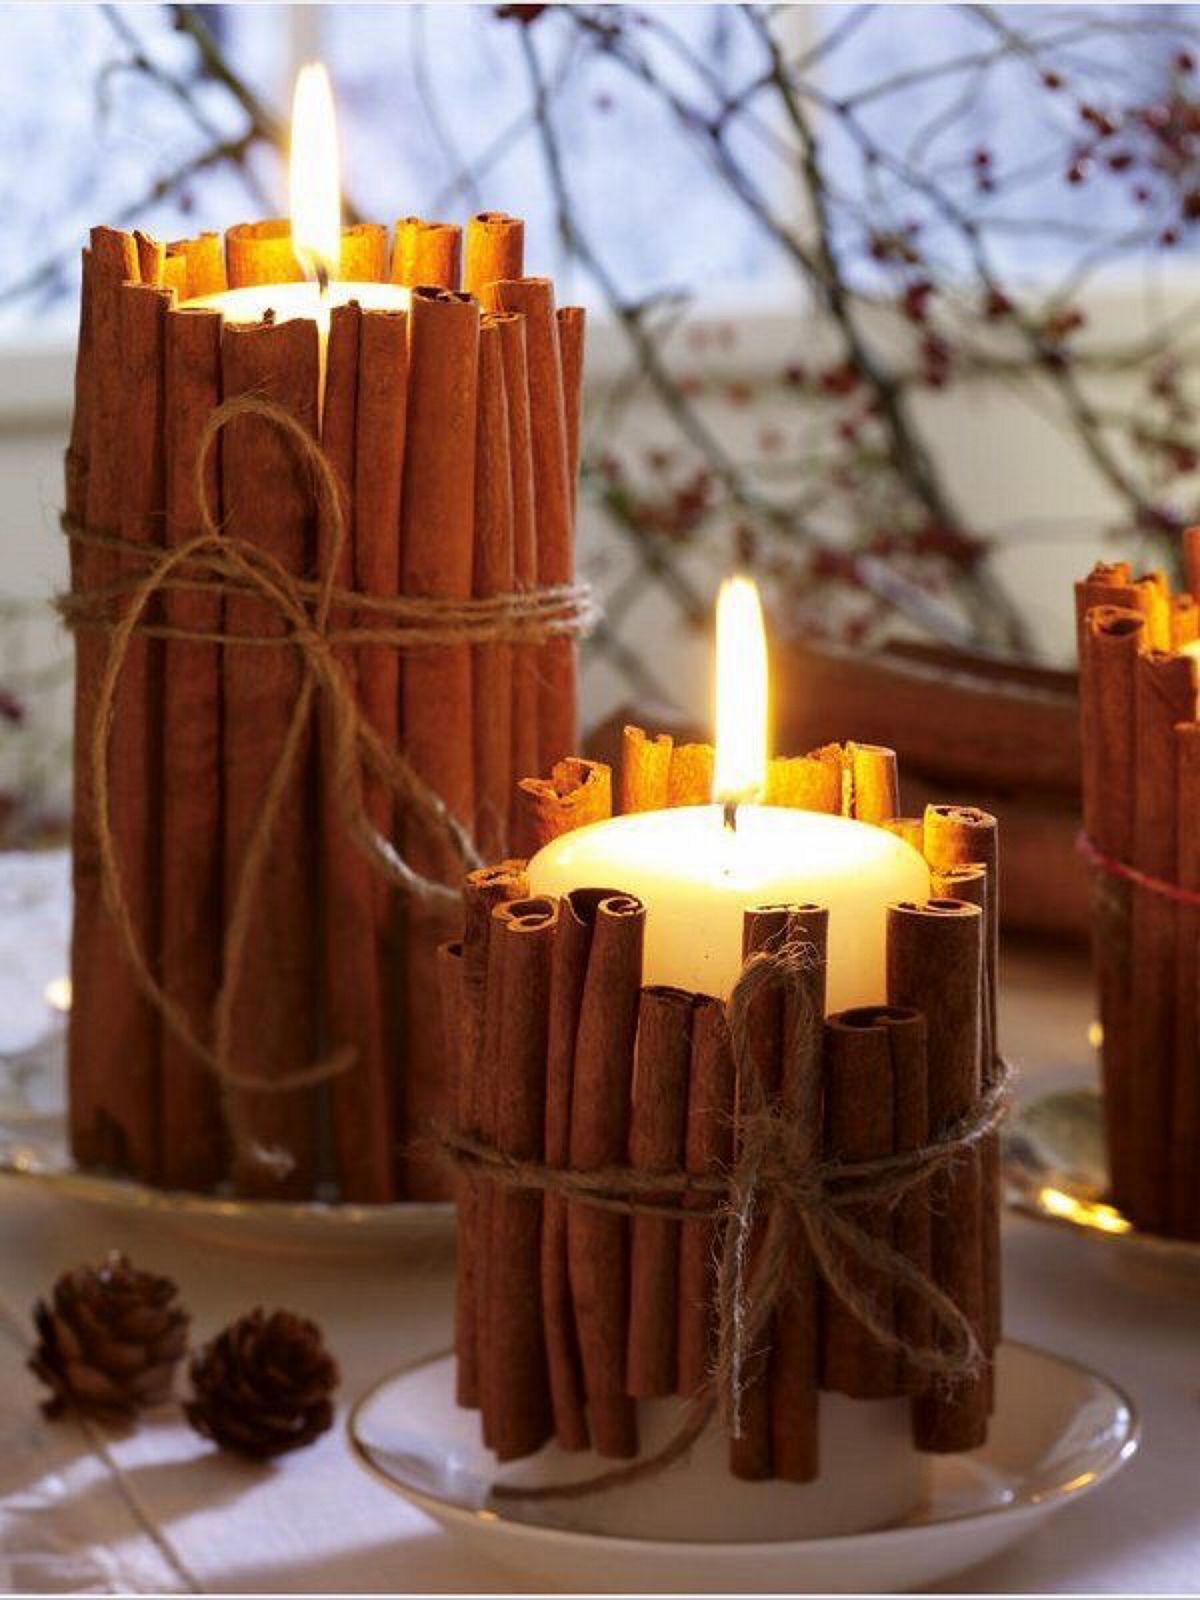 Scented Cinnamon Candles From Homebnc